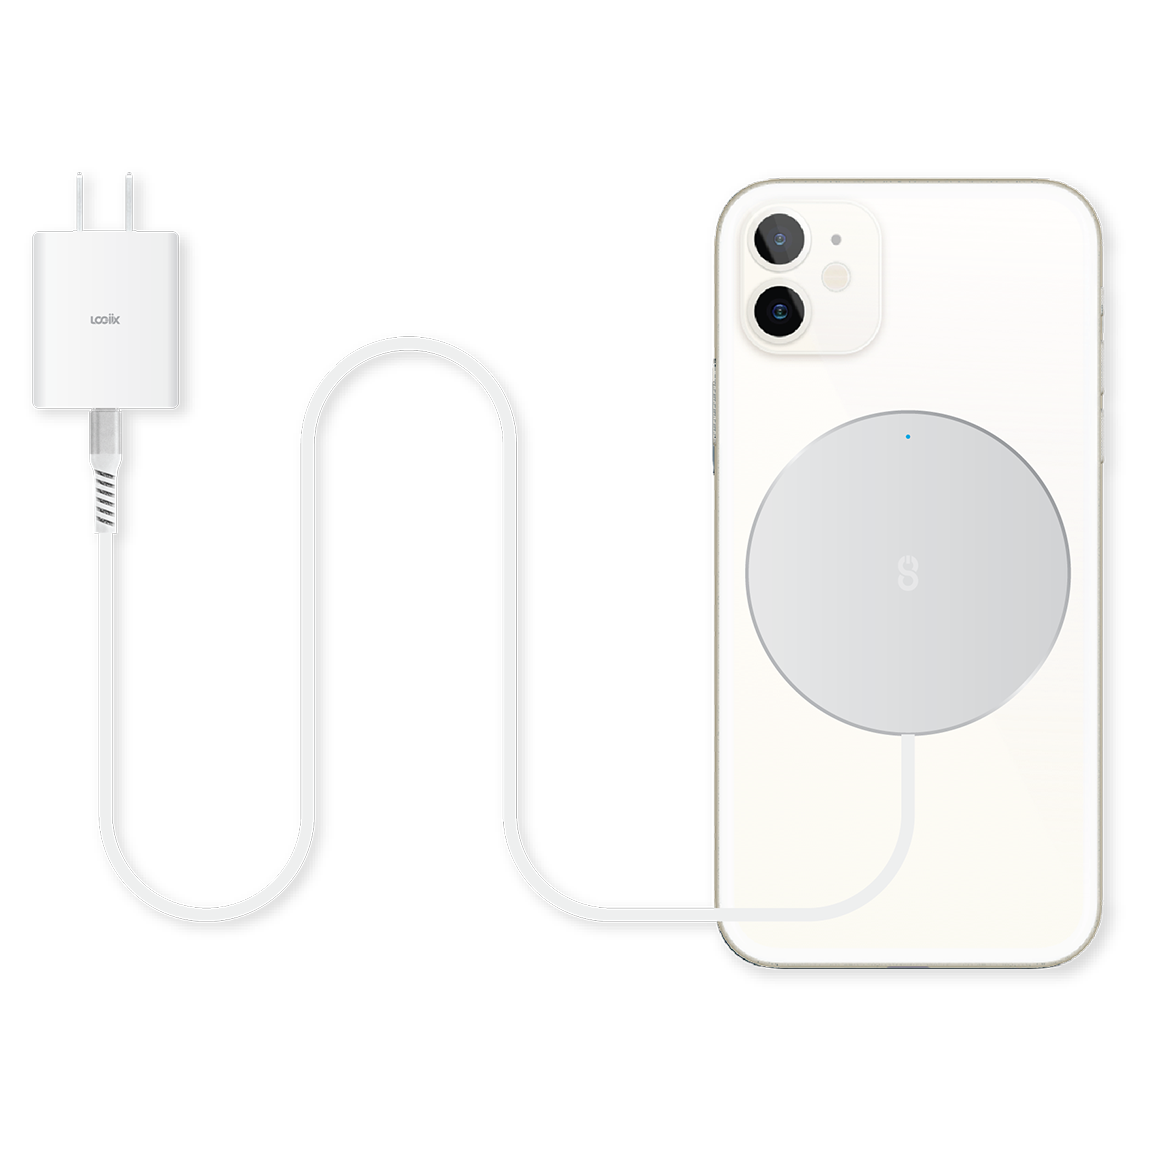 Silver MagSafe compatible fast-charging magnetic charger with built-in 1.5m USB-C cable charging a white iPhone 12 